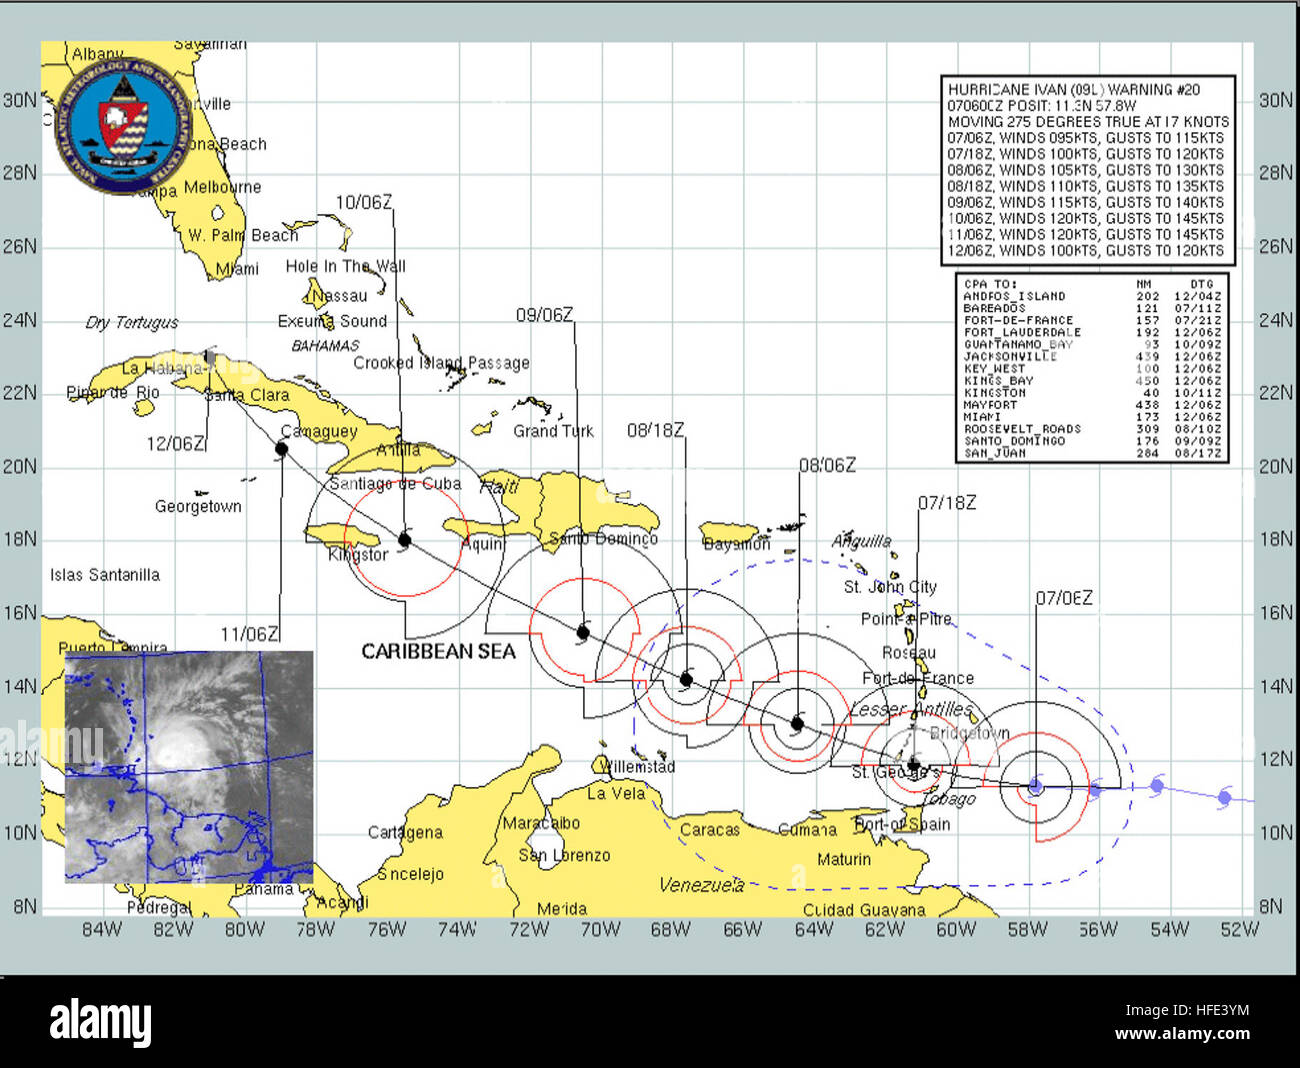 040907-N-0000X-001 Mid-Atlantic Ocean (Sept. 7, 2004) - Current forecast projected path and wind speeds of Hurricane Ivan from Sept 7 to Sept 12. Ivan, a category three hurricane on the Saffir-Simpson hurricane scale, is approximately 45 miles Northeast of Tobago, moving at near 18 MPH. Maximum sustained winds remain near 115 MPH with winds extending outwards up to 70 miles. The storm is expected to gradually turn toward the west-northwest later Tuesday. Forecasters said Ivan is the strongest hurricane to develop at such a low latitude in recorded Atlantic hurricane history. Photo provided by  Stock Photo